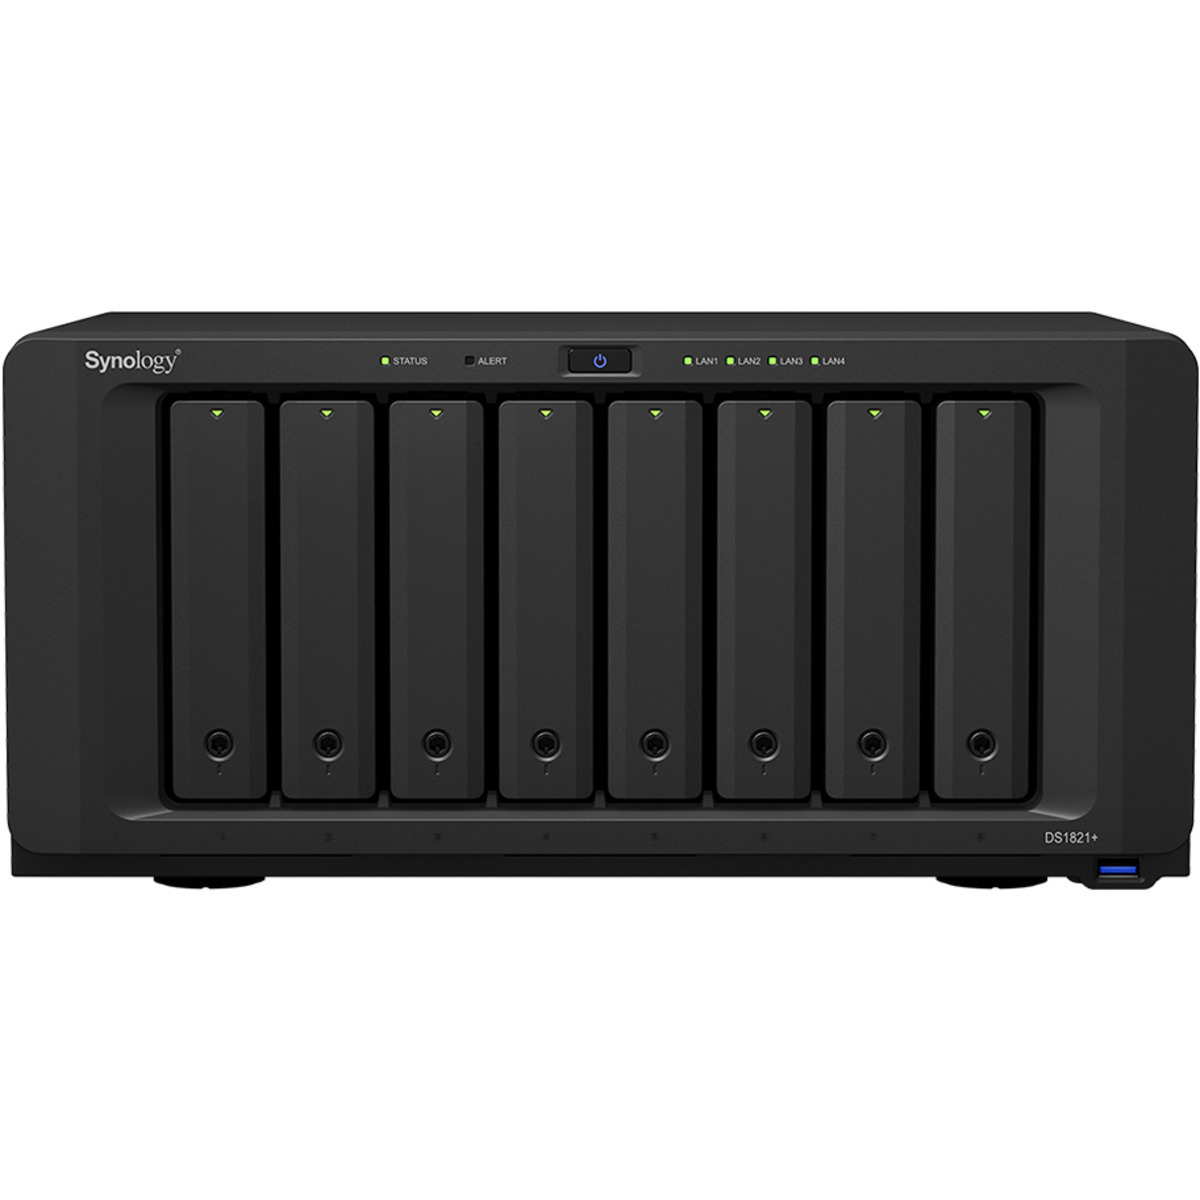 Synology DiskStation DS1821+ 80tb 8-Bay Desktop Multimedia / Power User / Business NAS - Network Attached Storage Device 8x10tb Western Digital Red Pro WD102KFBX 3.5 7200rpm SATA 6Gb/s HDD NAS Class Drives Installed - Burn-In Tested - FREE RAM UPGRADE DiskStation DS1821+